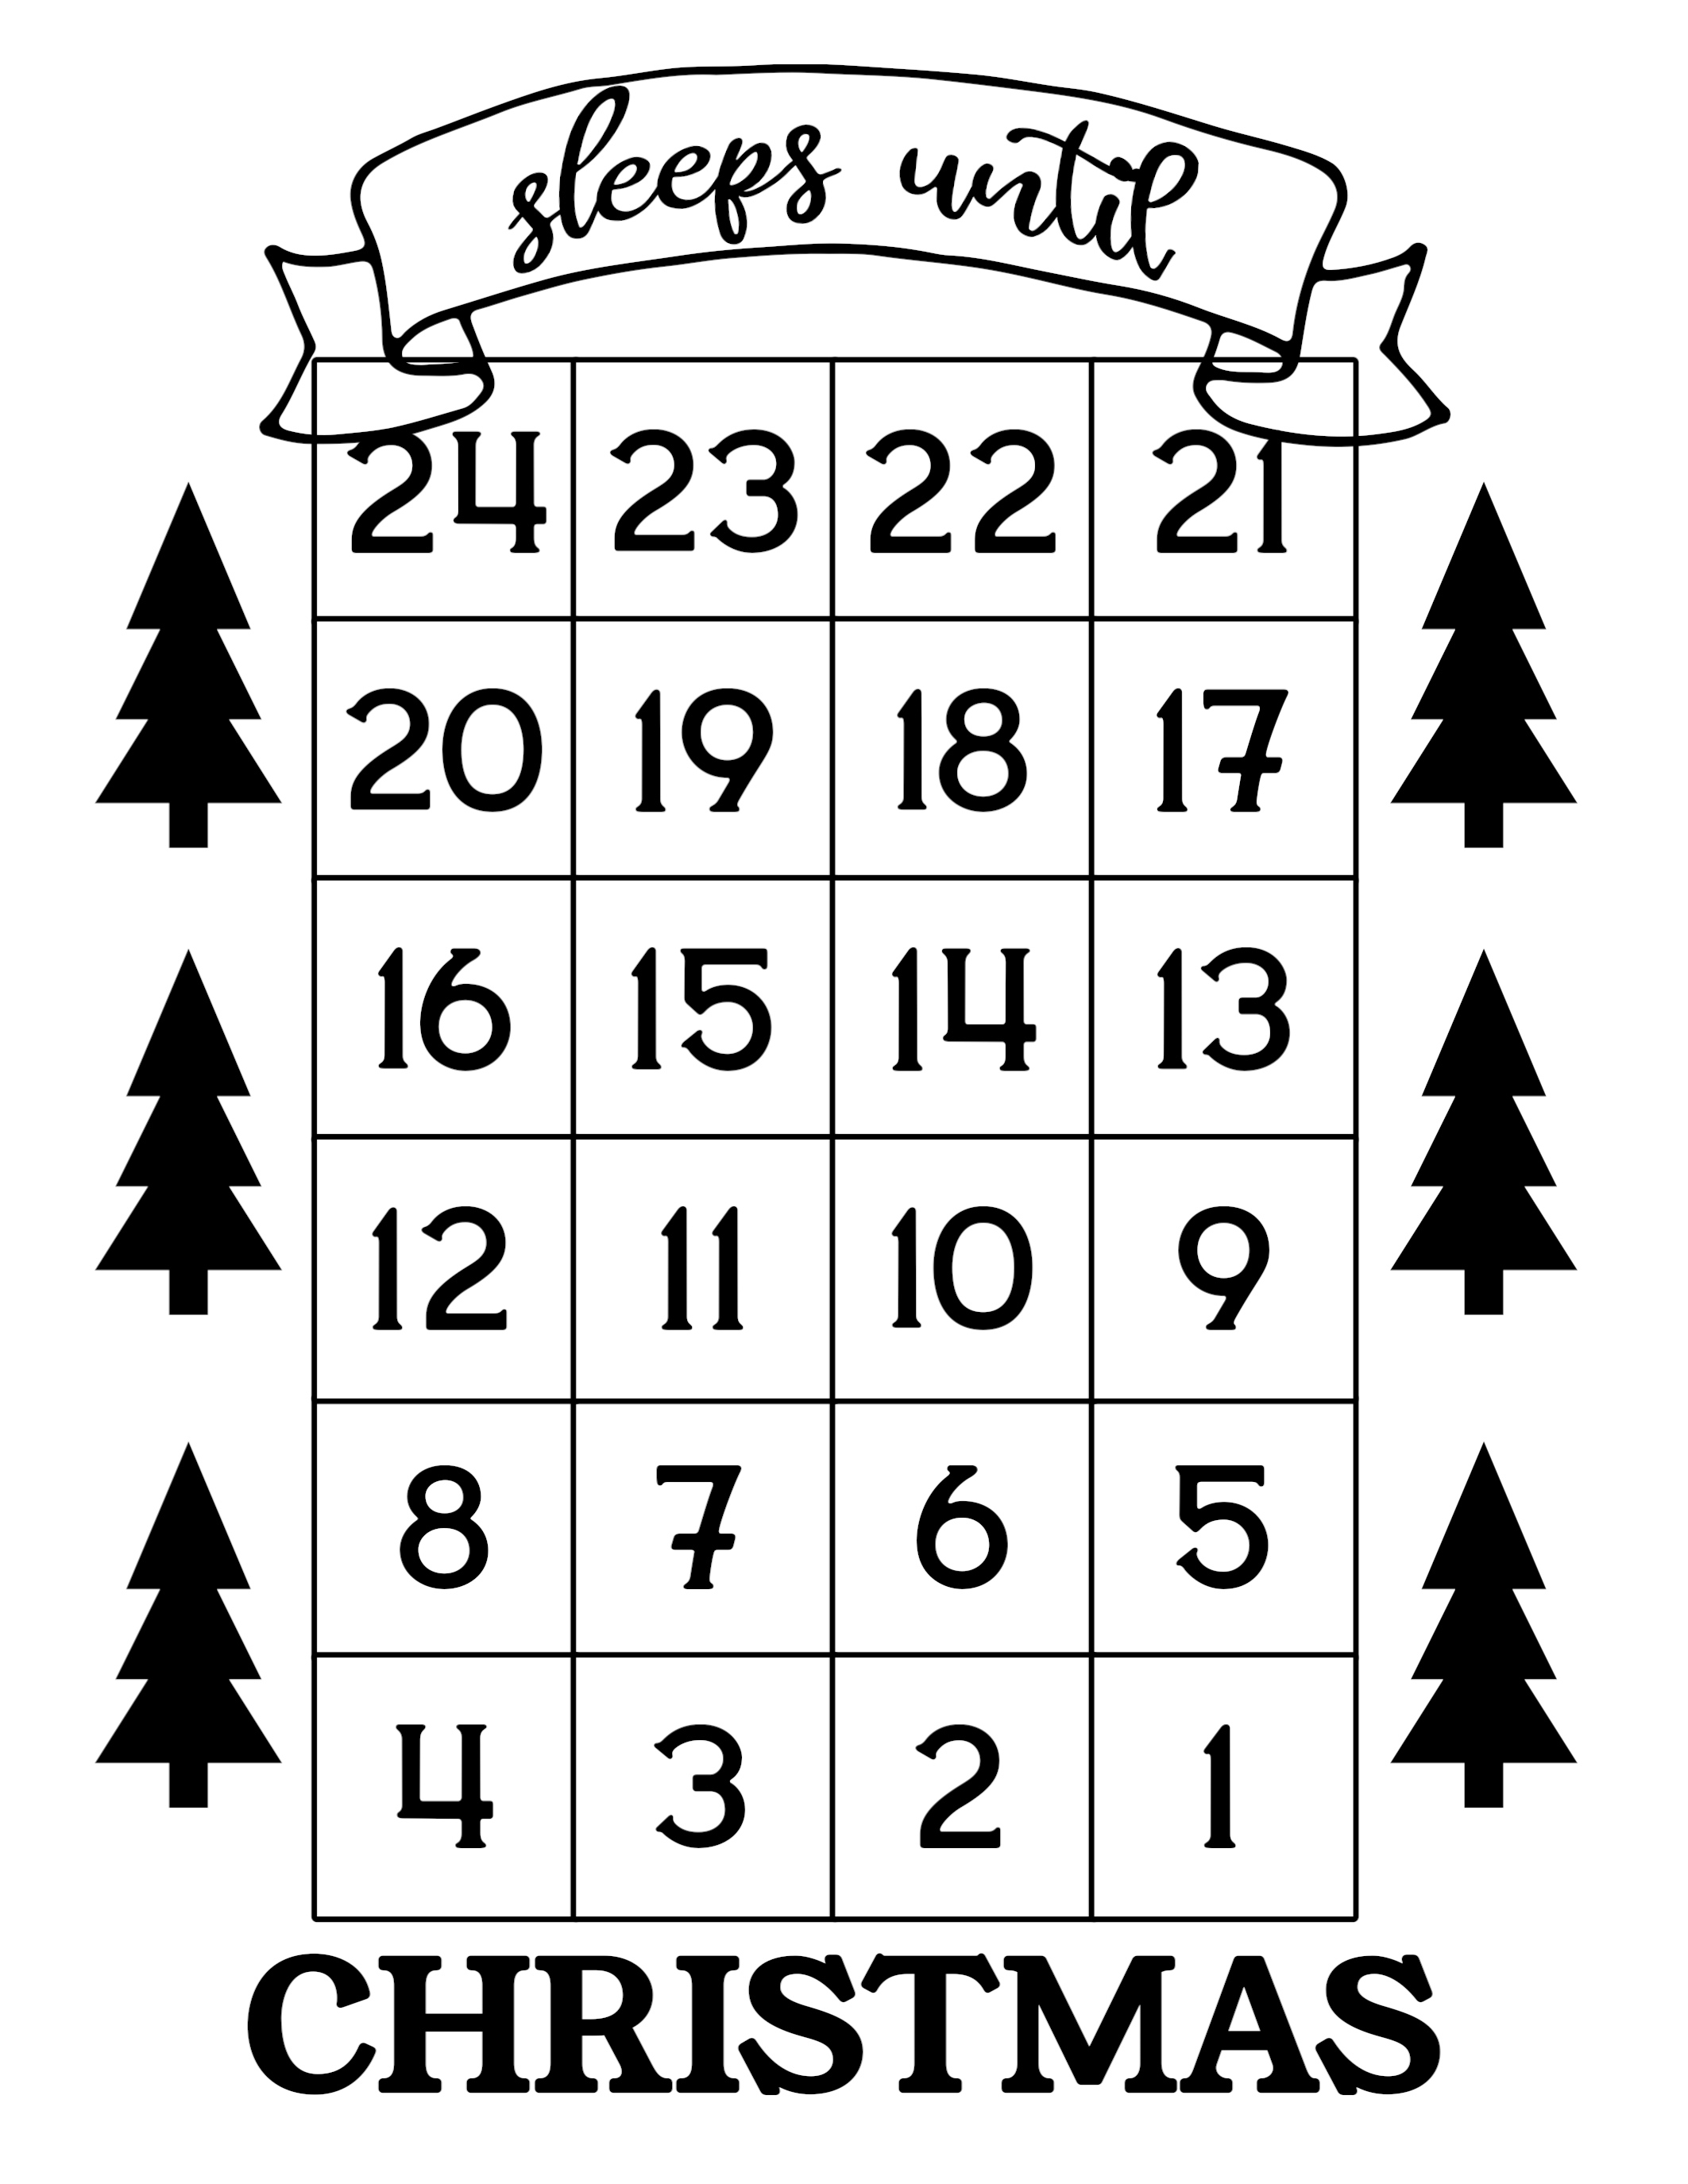 How Many Days Until Christmas Free Printable - Paper Trail Free Countdown To Christmas Calendar